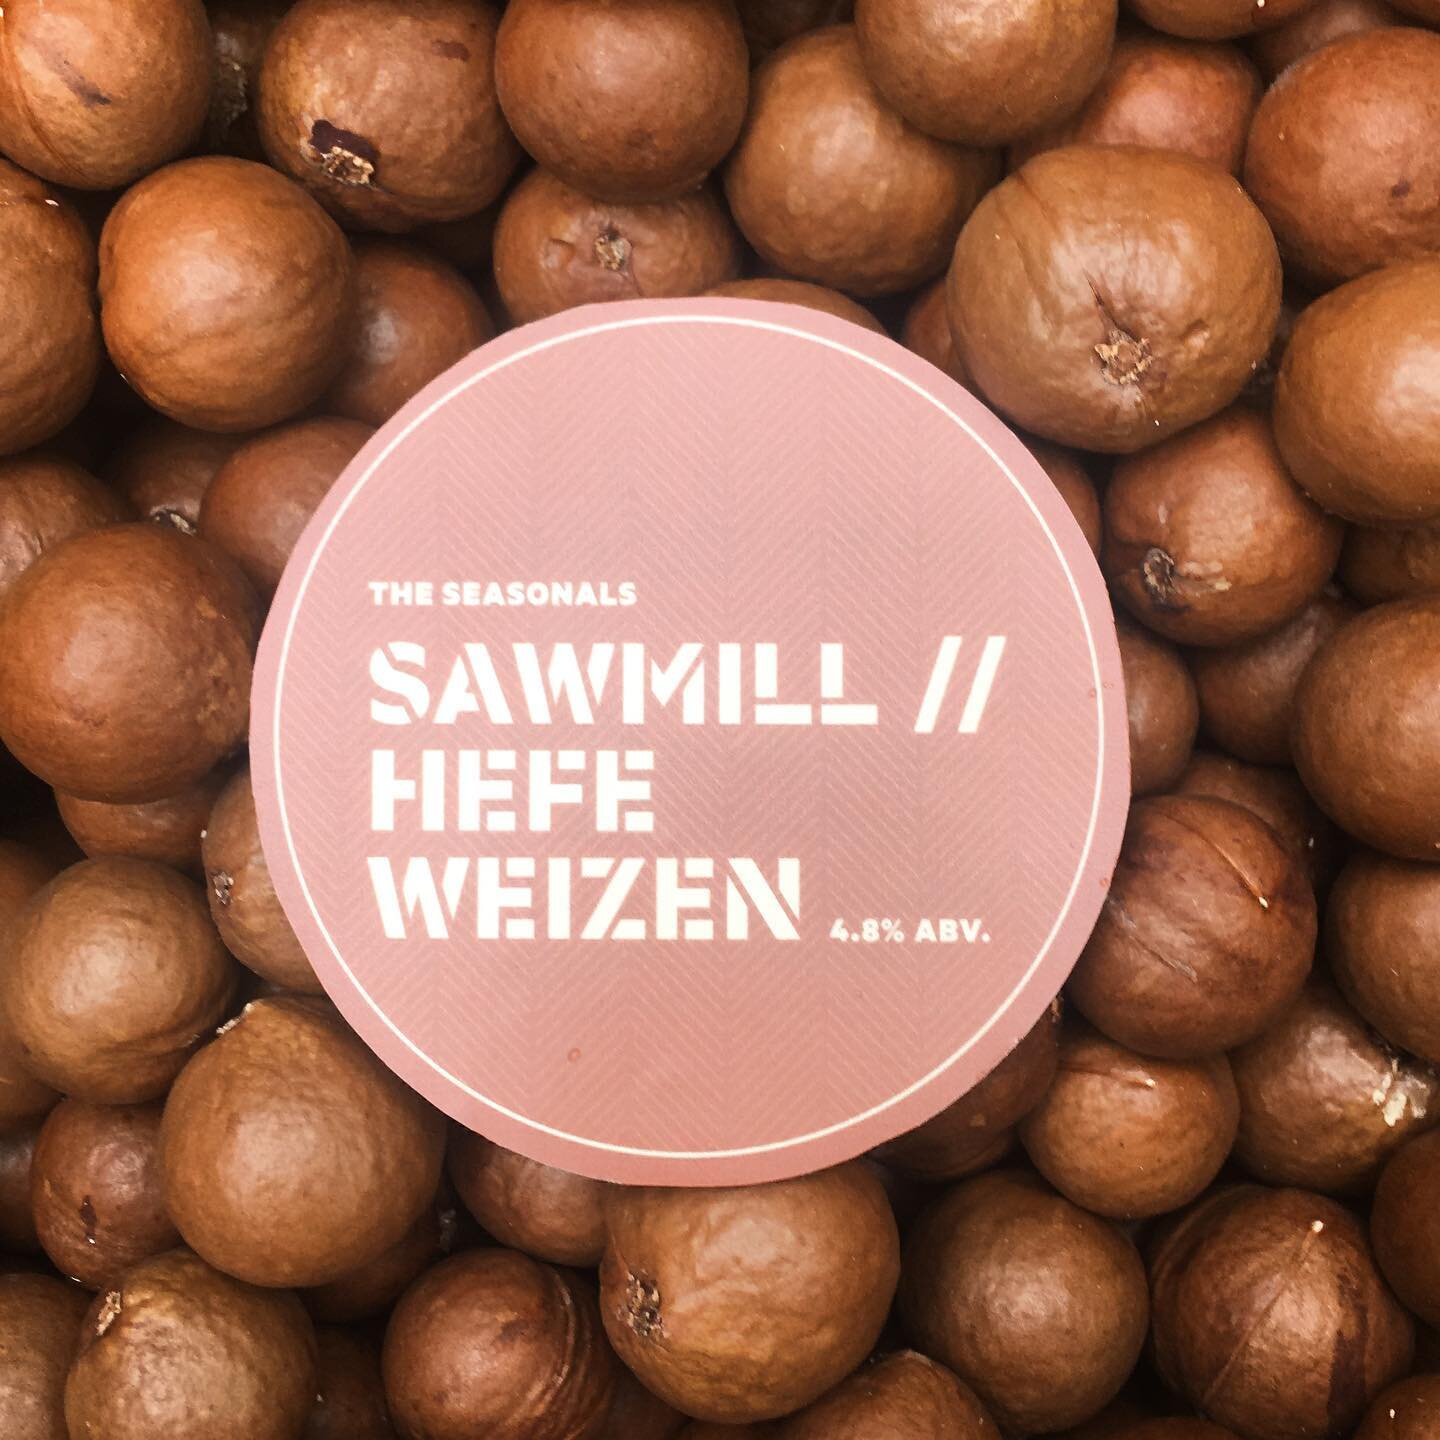 Today we&rsquo;re pouring @sawmillbrewing Hefe Weizen.